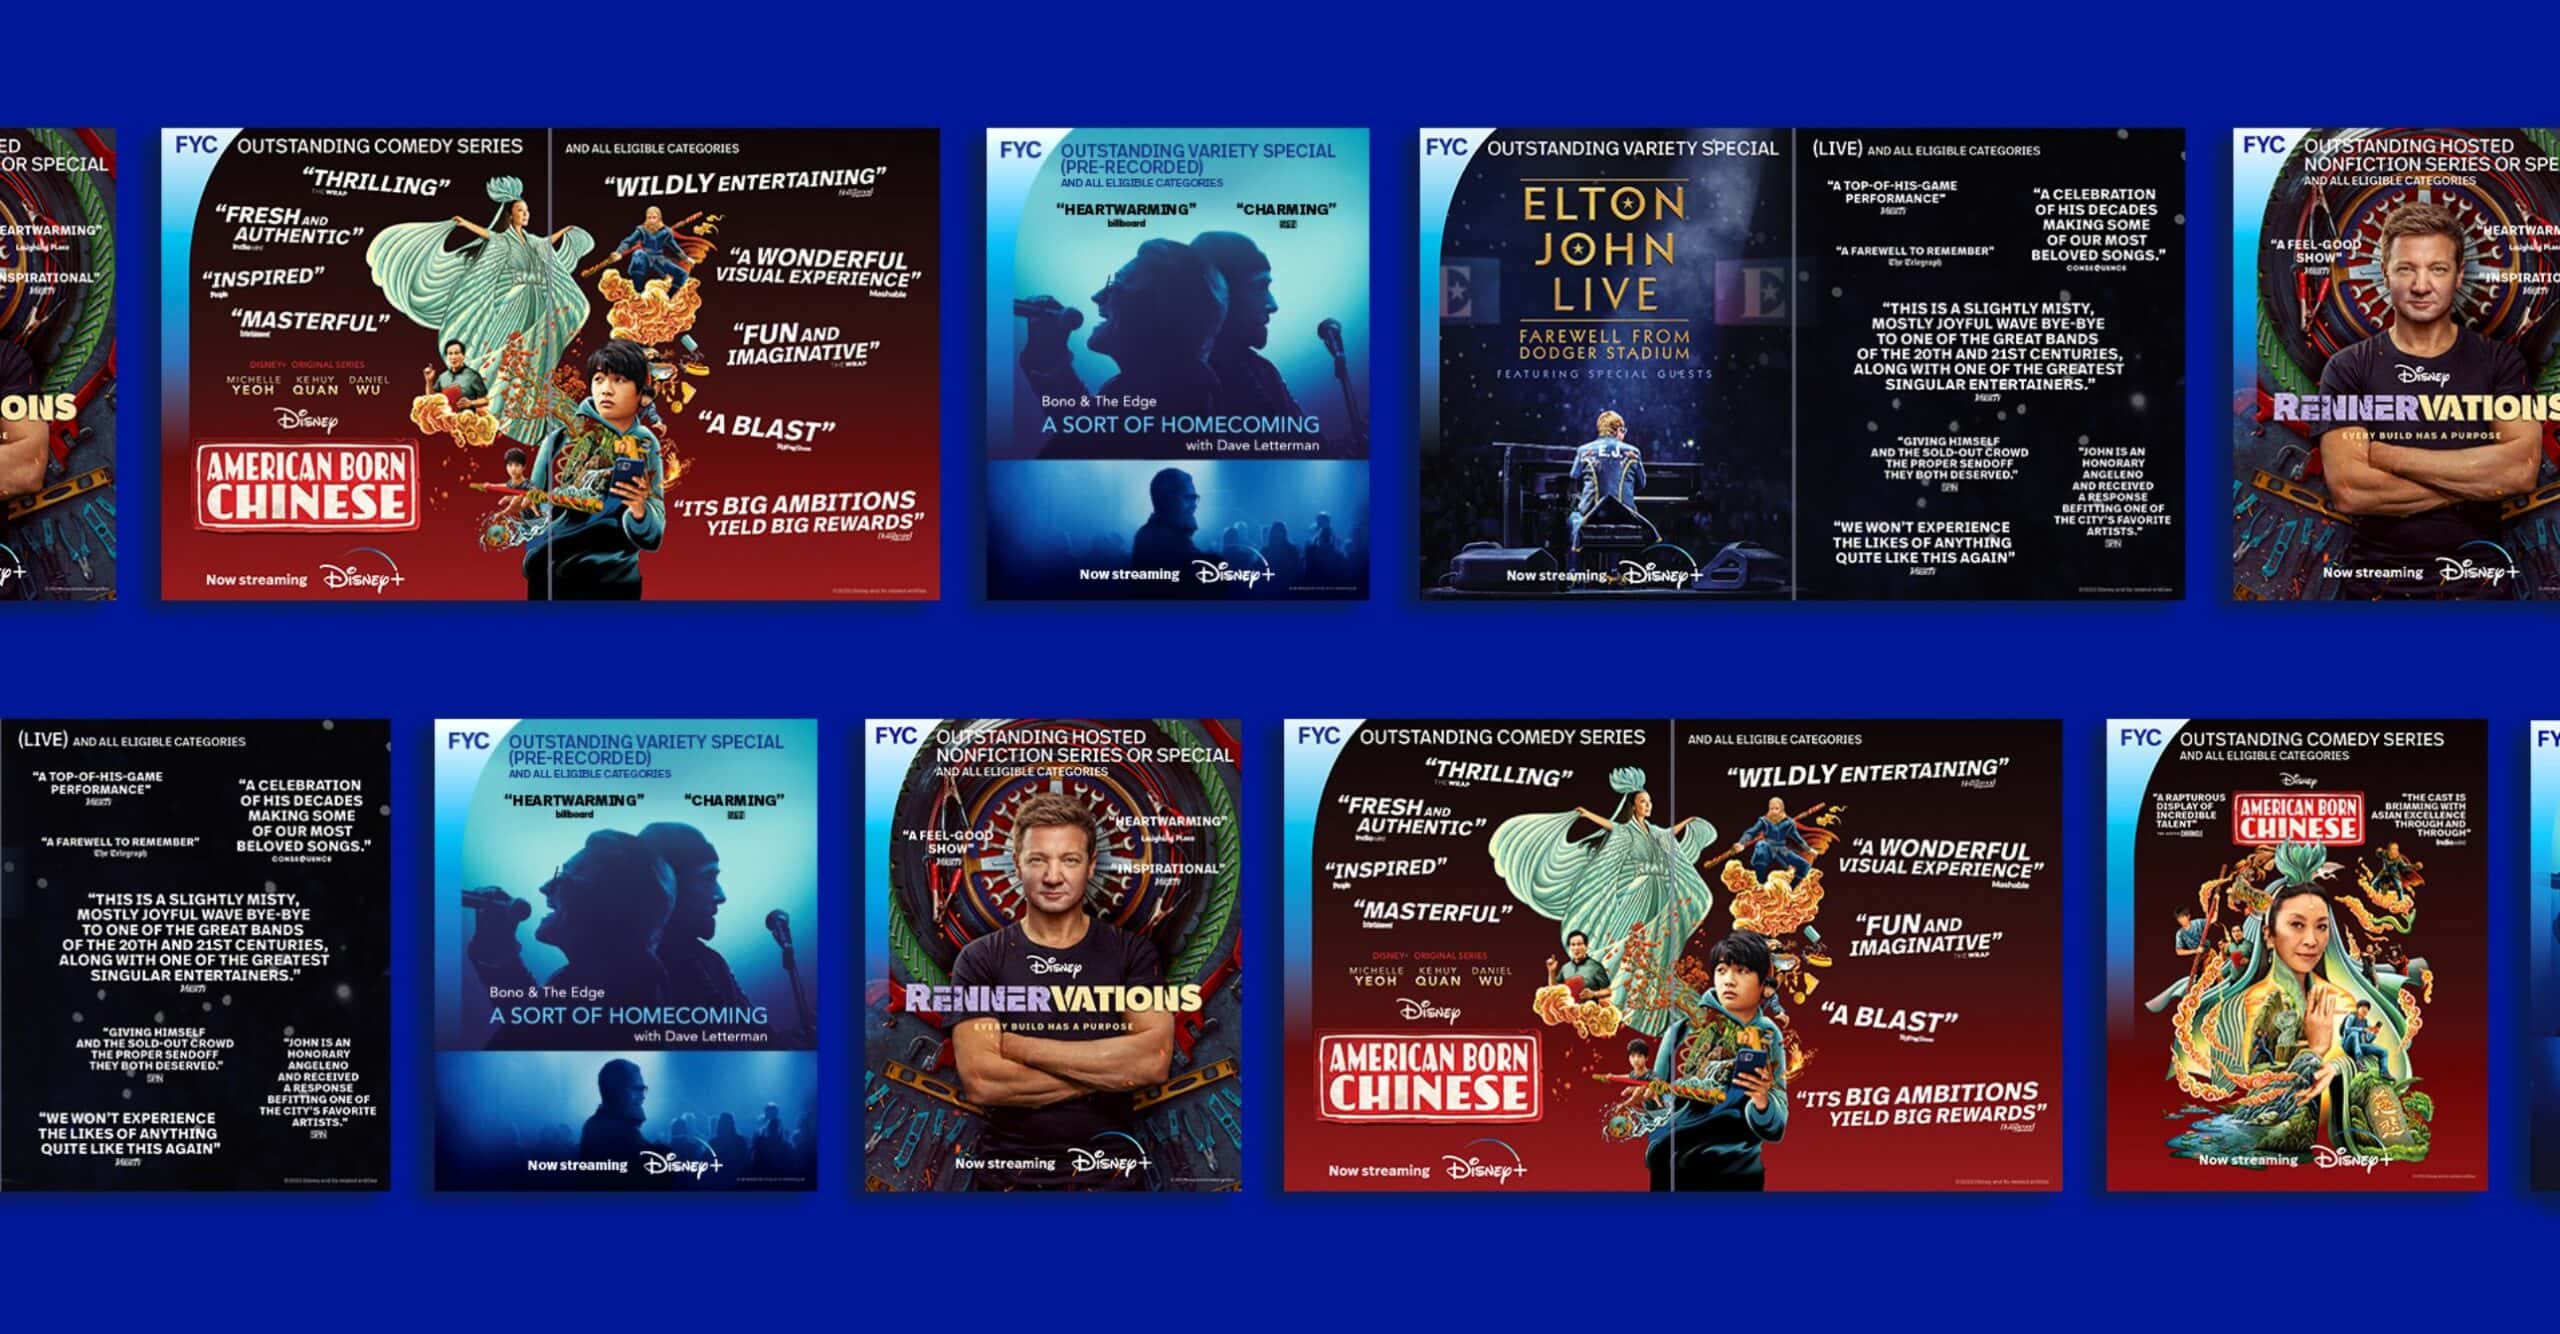 Disneys Emmy Campaign - Print Material